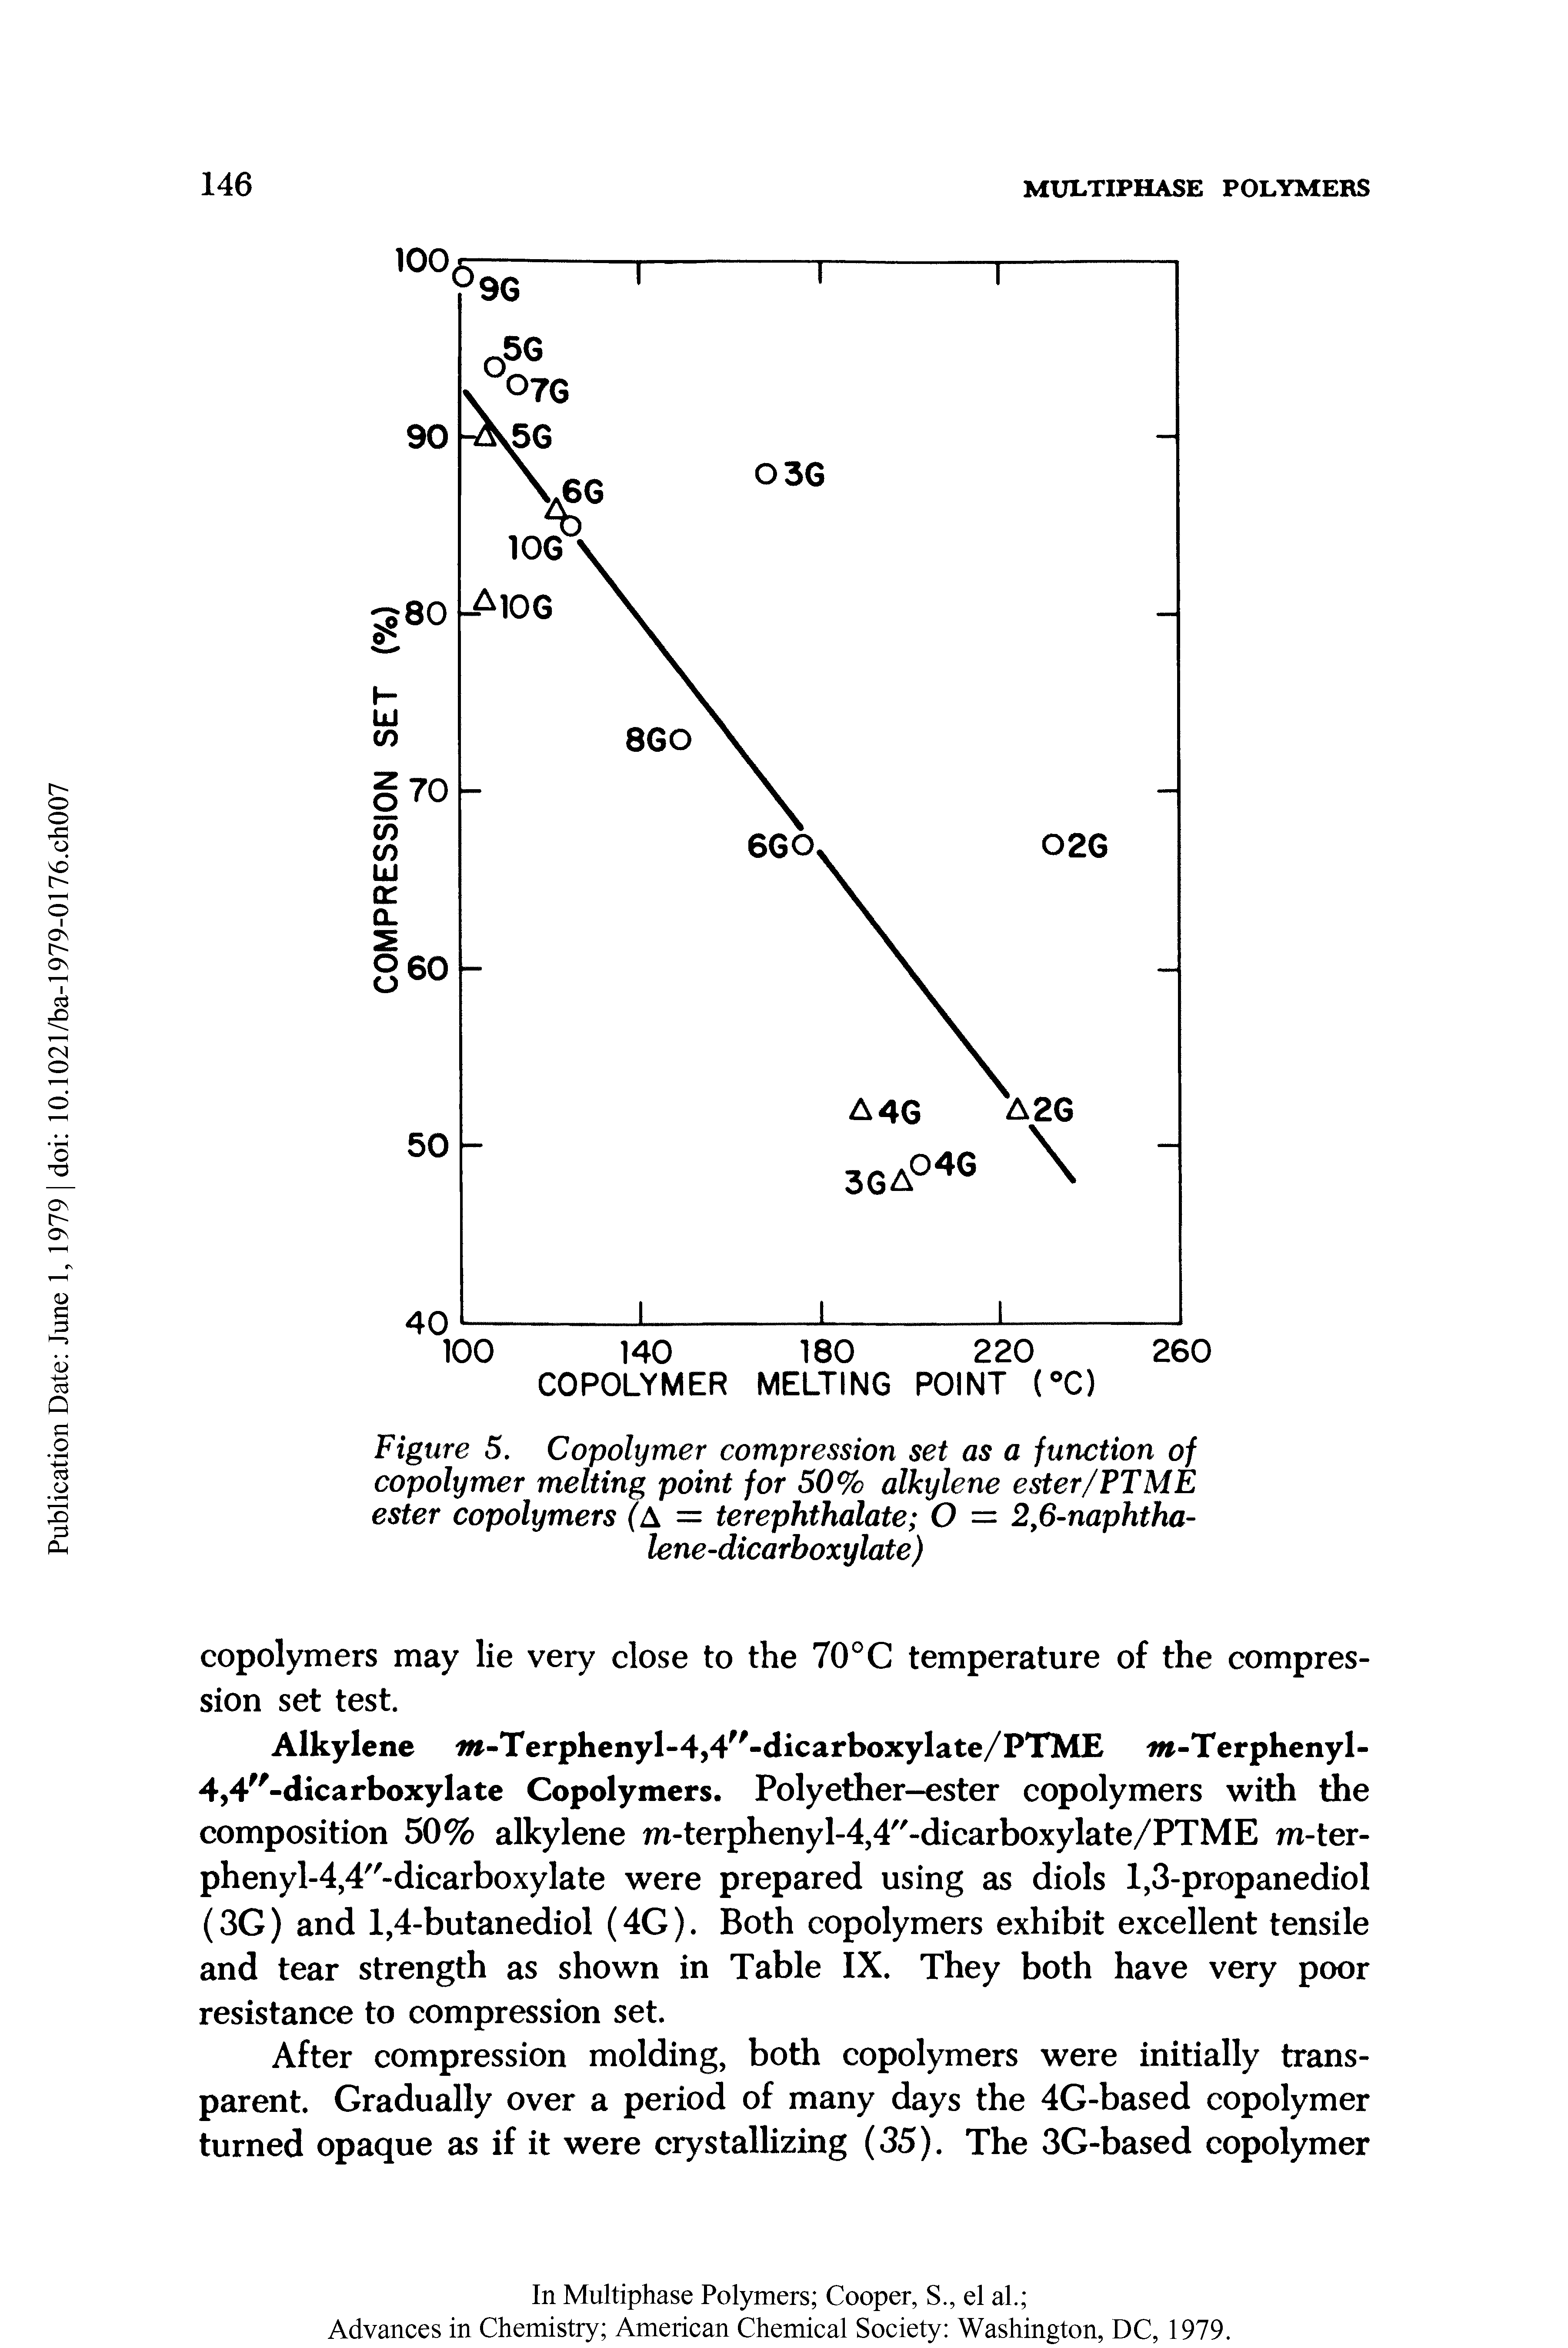 Figure 5. Copolymer compression set as a function of copolymer melting point for 50% alkylene ester/PTME ester copolymers (A = terephthalate O = 2,6-naphtha-lene-dicarboxylate )...